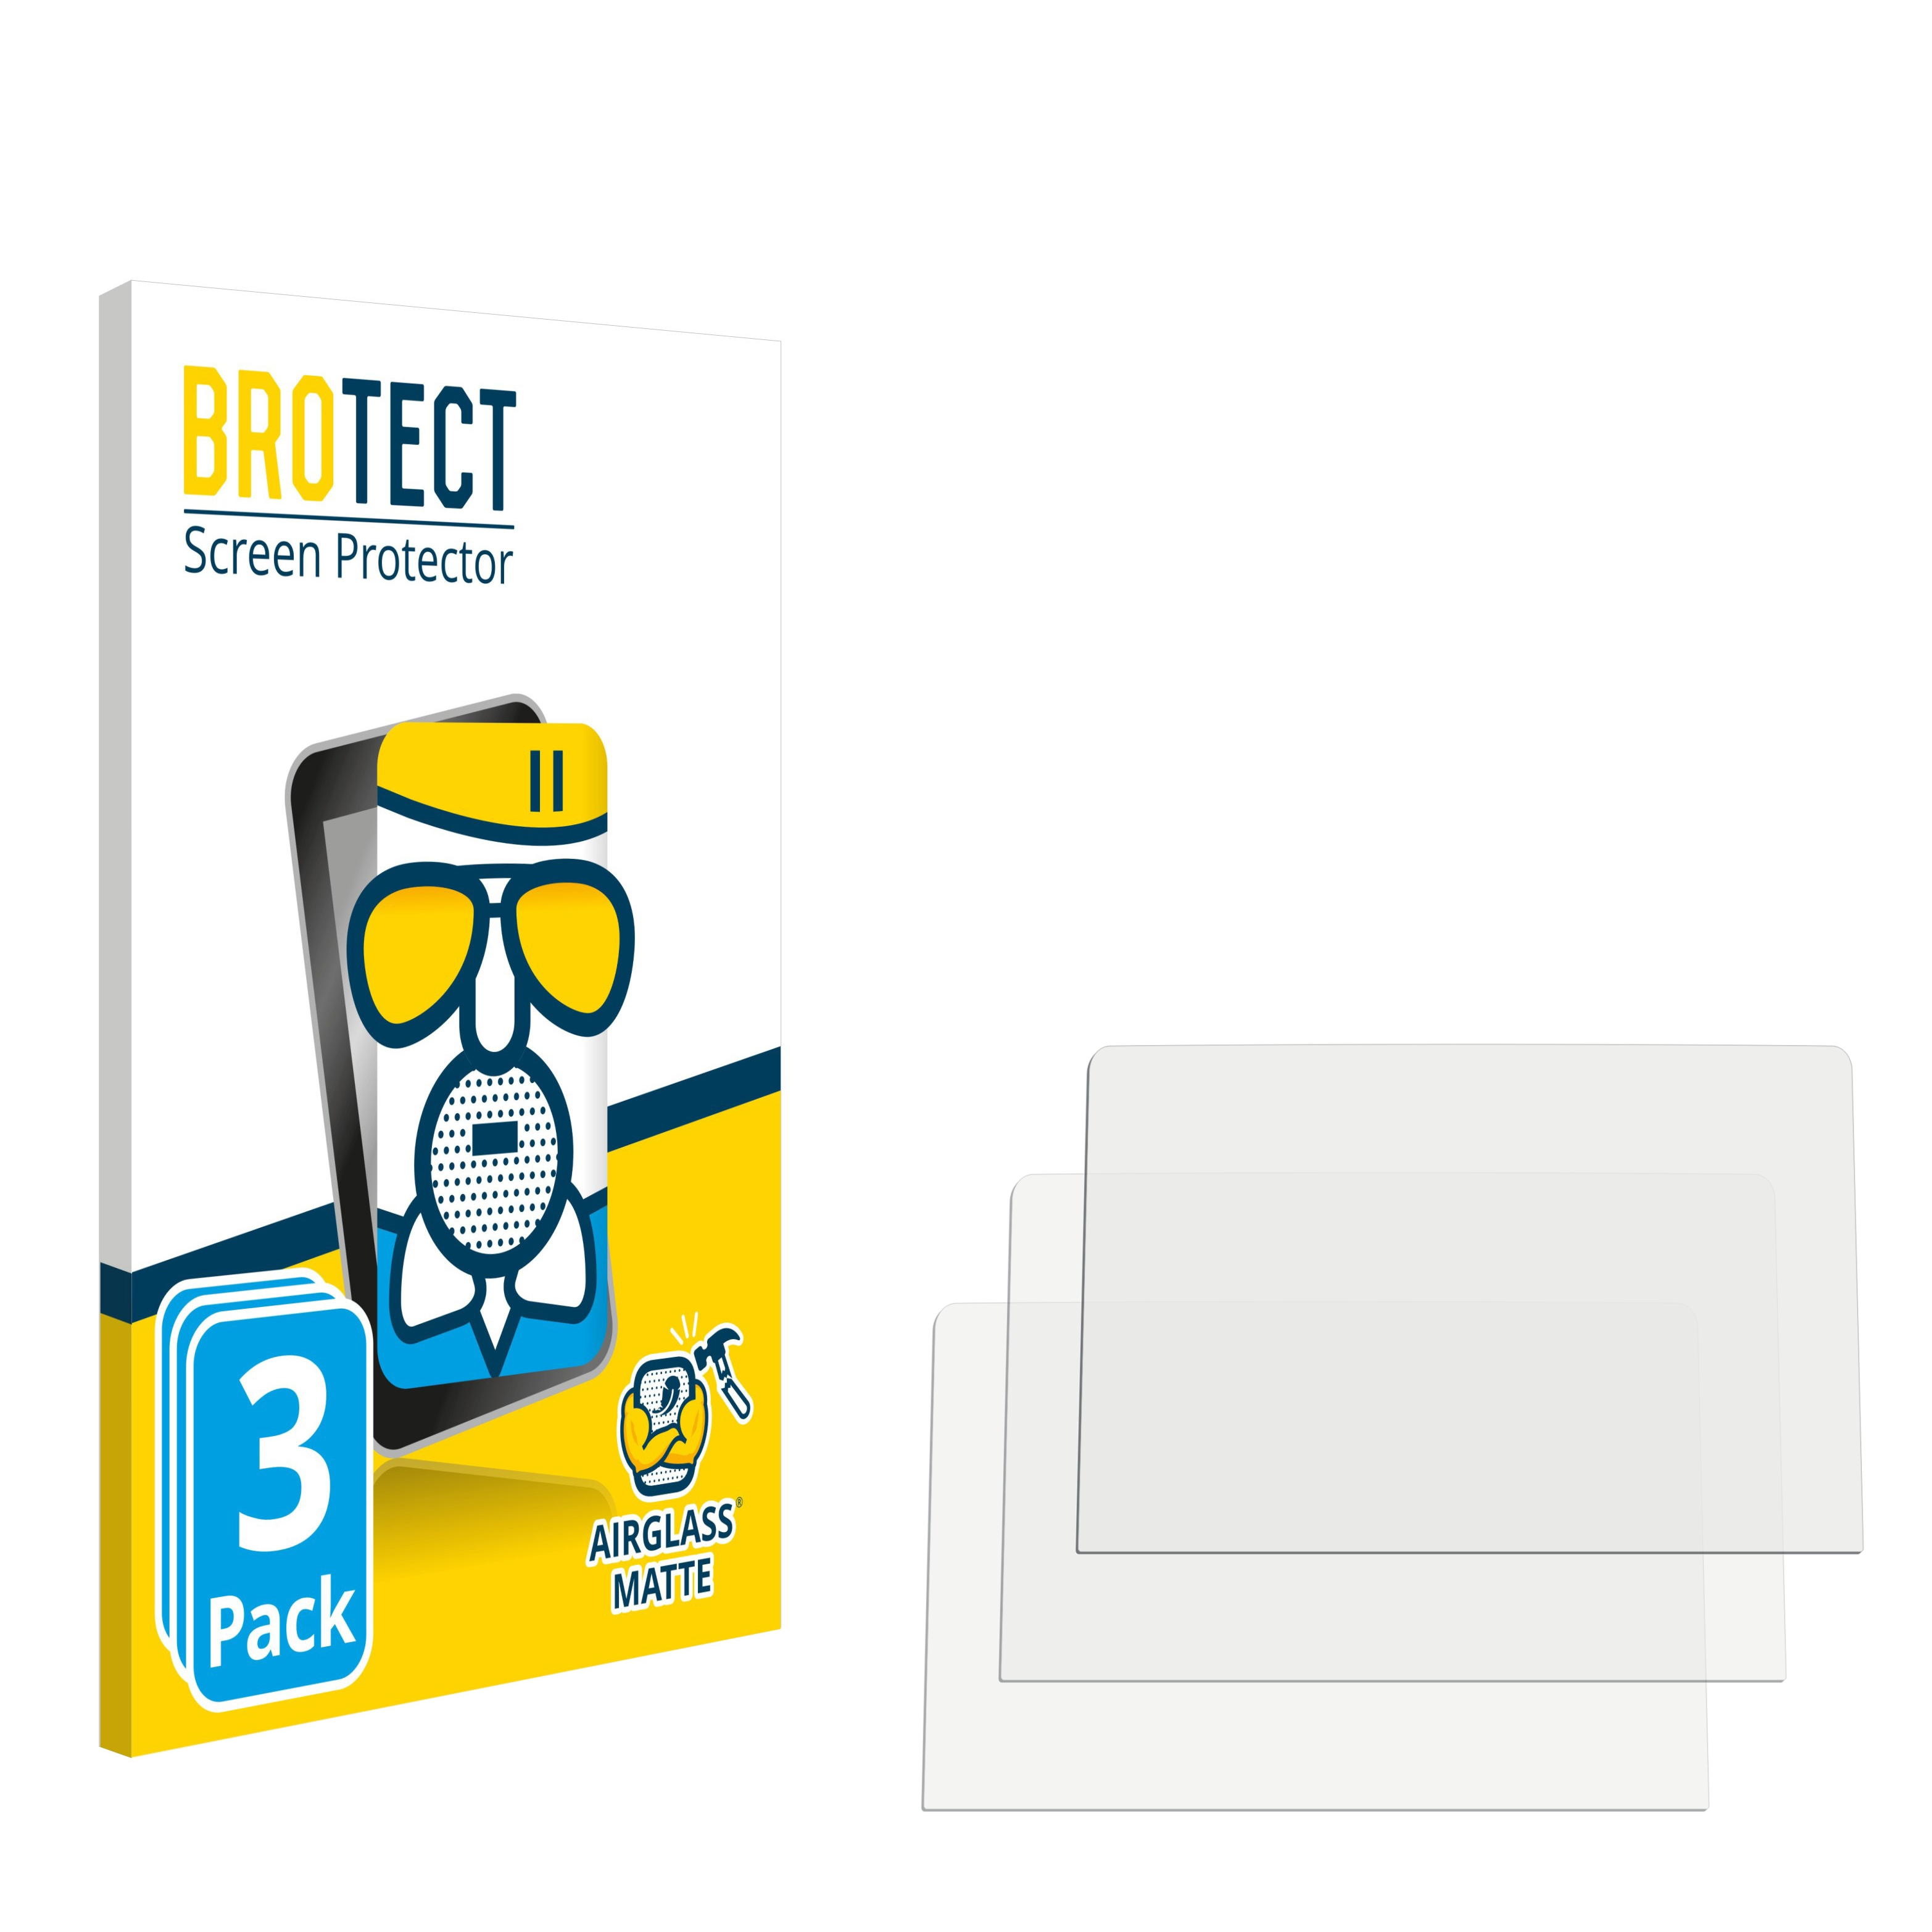 BROTECT 3x Airglass Civic matte Connect 7\